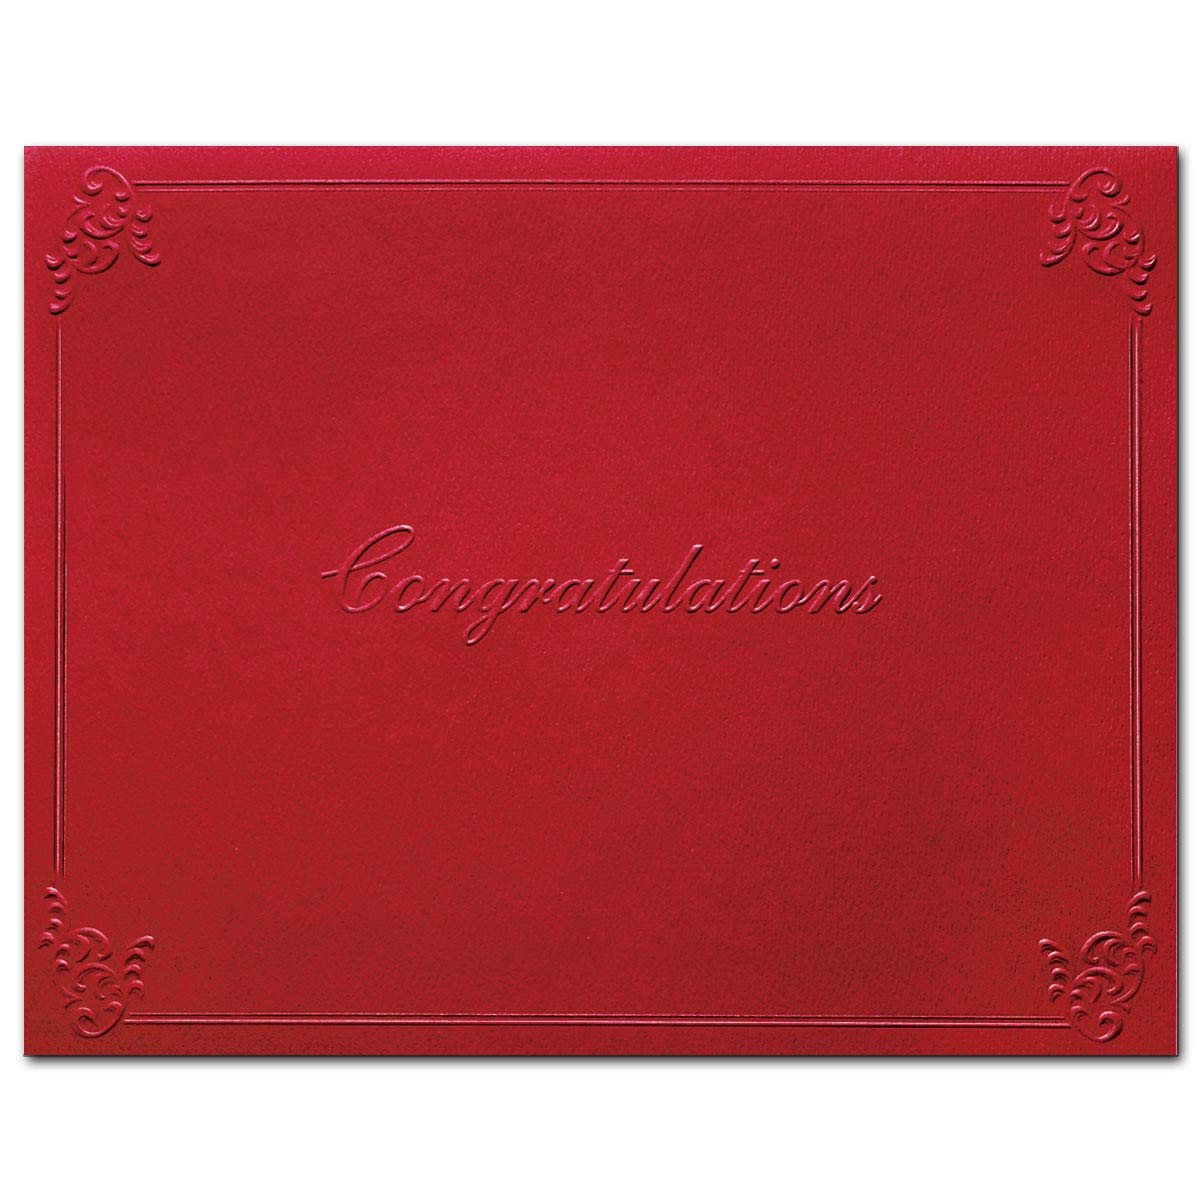 PaperDirect Congratulations Embossed Certificate Jackets, 9 1/2 x 12, Red, Count of 10